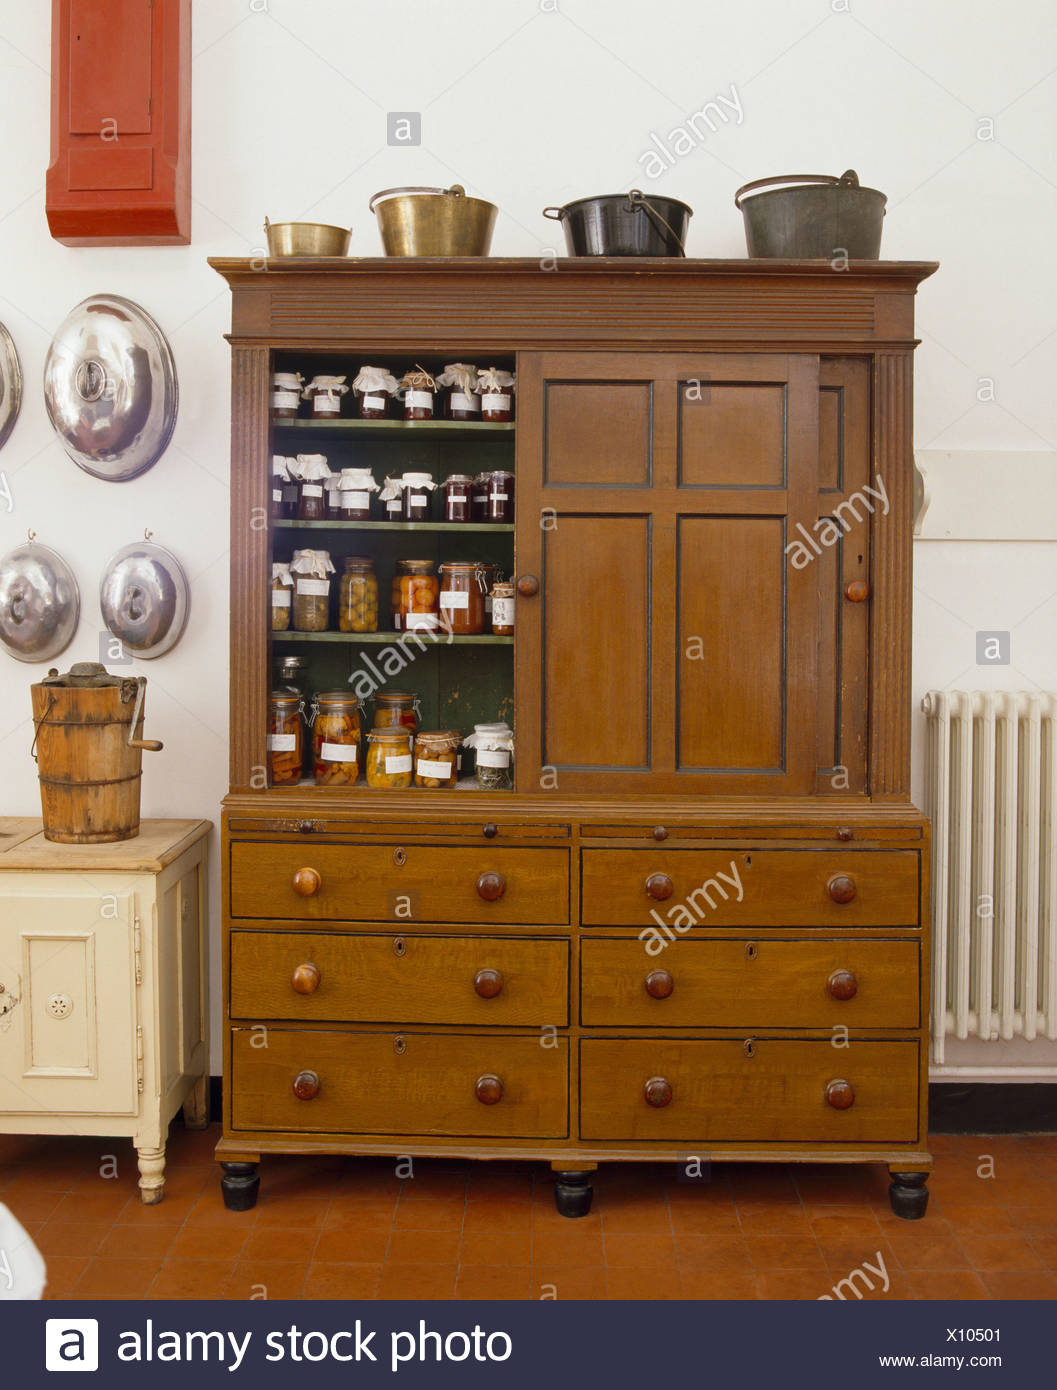 Preserves And Jams Stored In Antique Kitchen Dresser Stock Photo